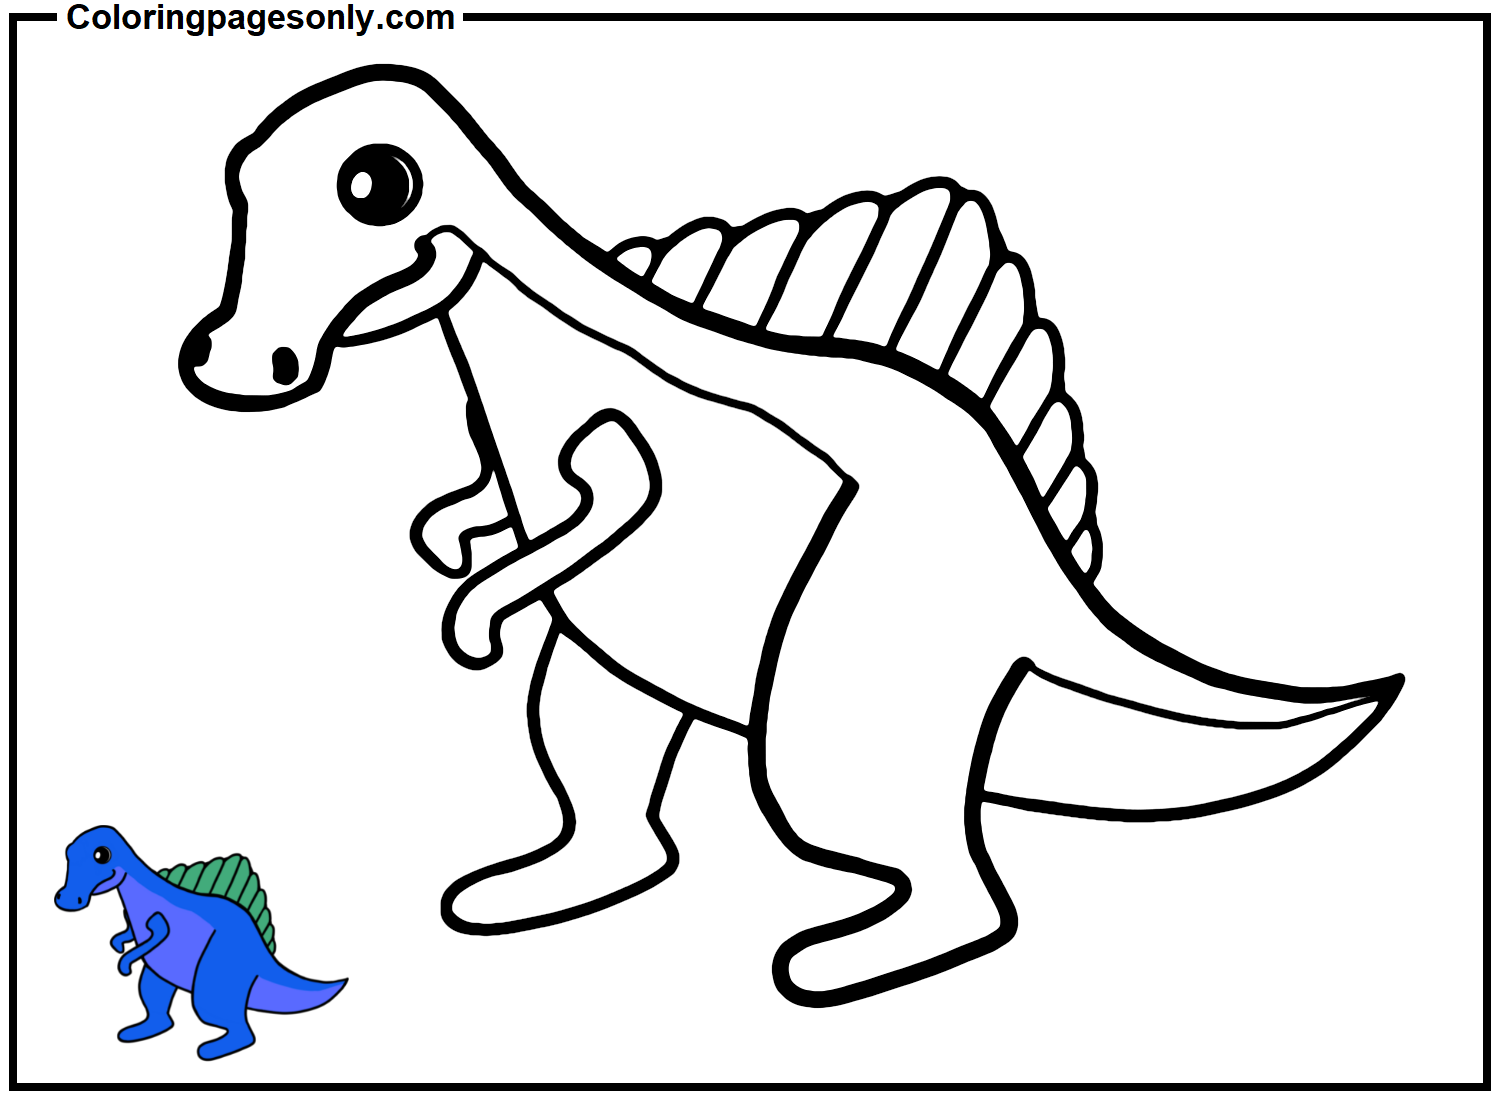 Cute Spinosaurus Coloring Pages